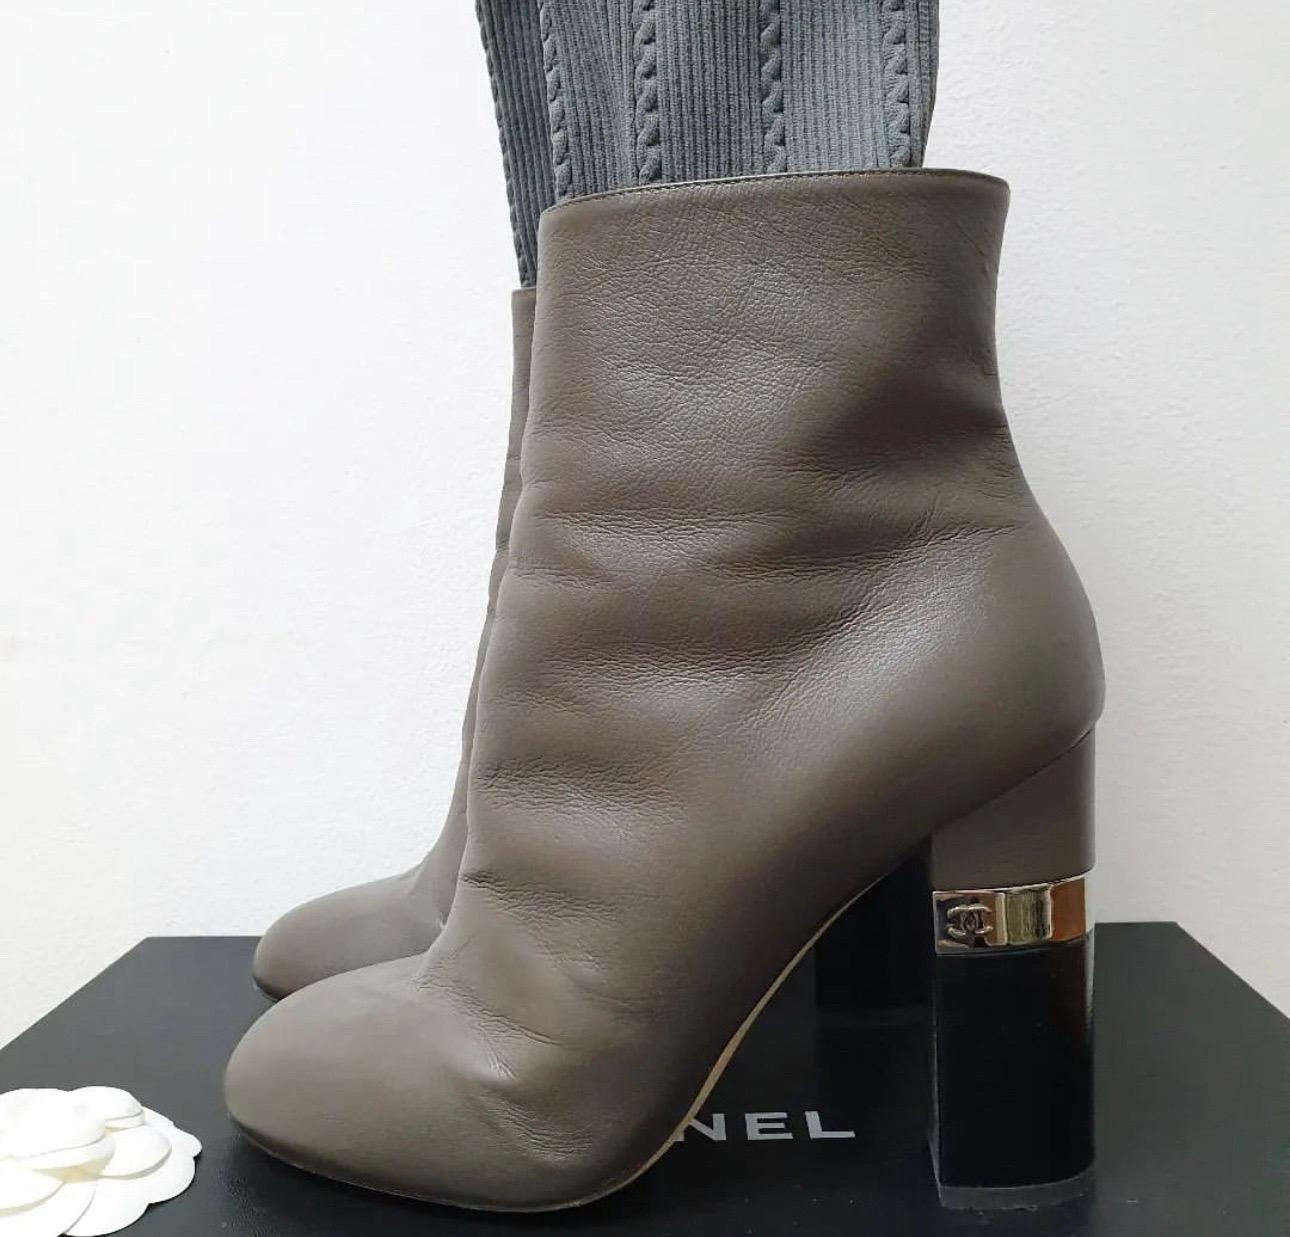 Chanel Leather Texlile Socks Heeled Boots For Sale 1